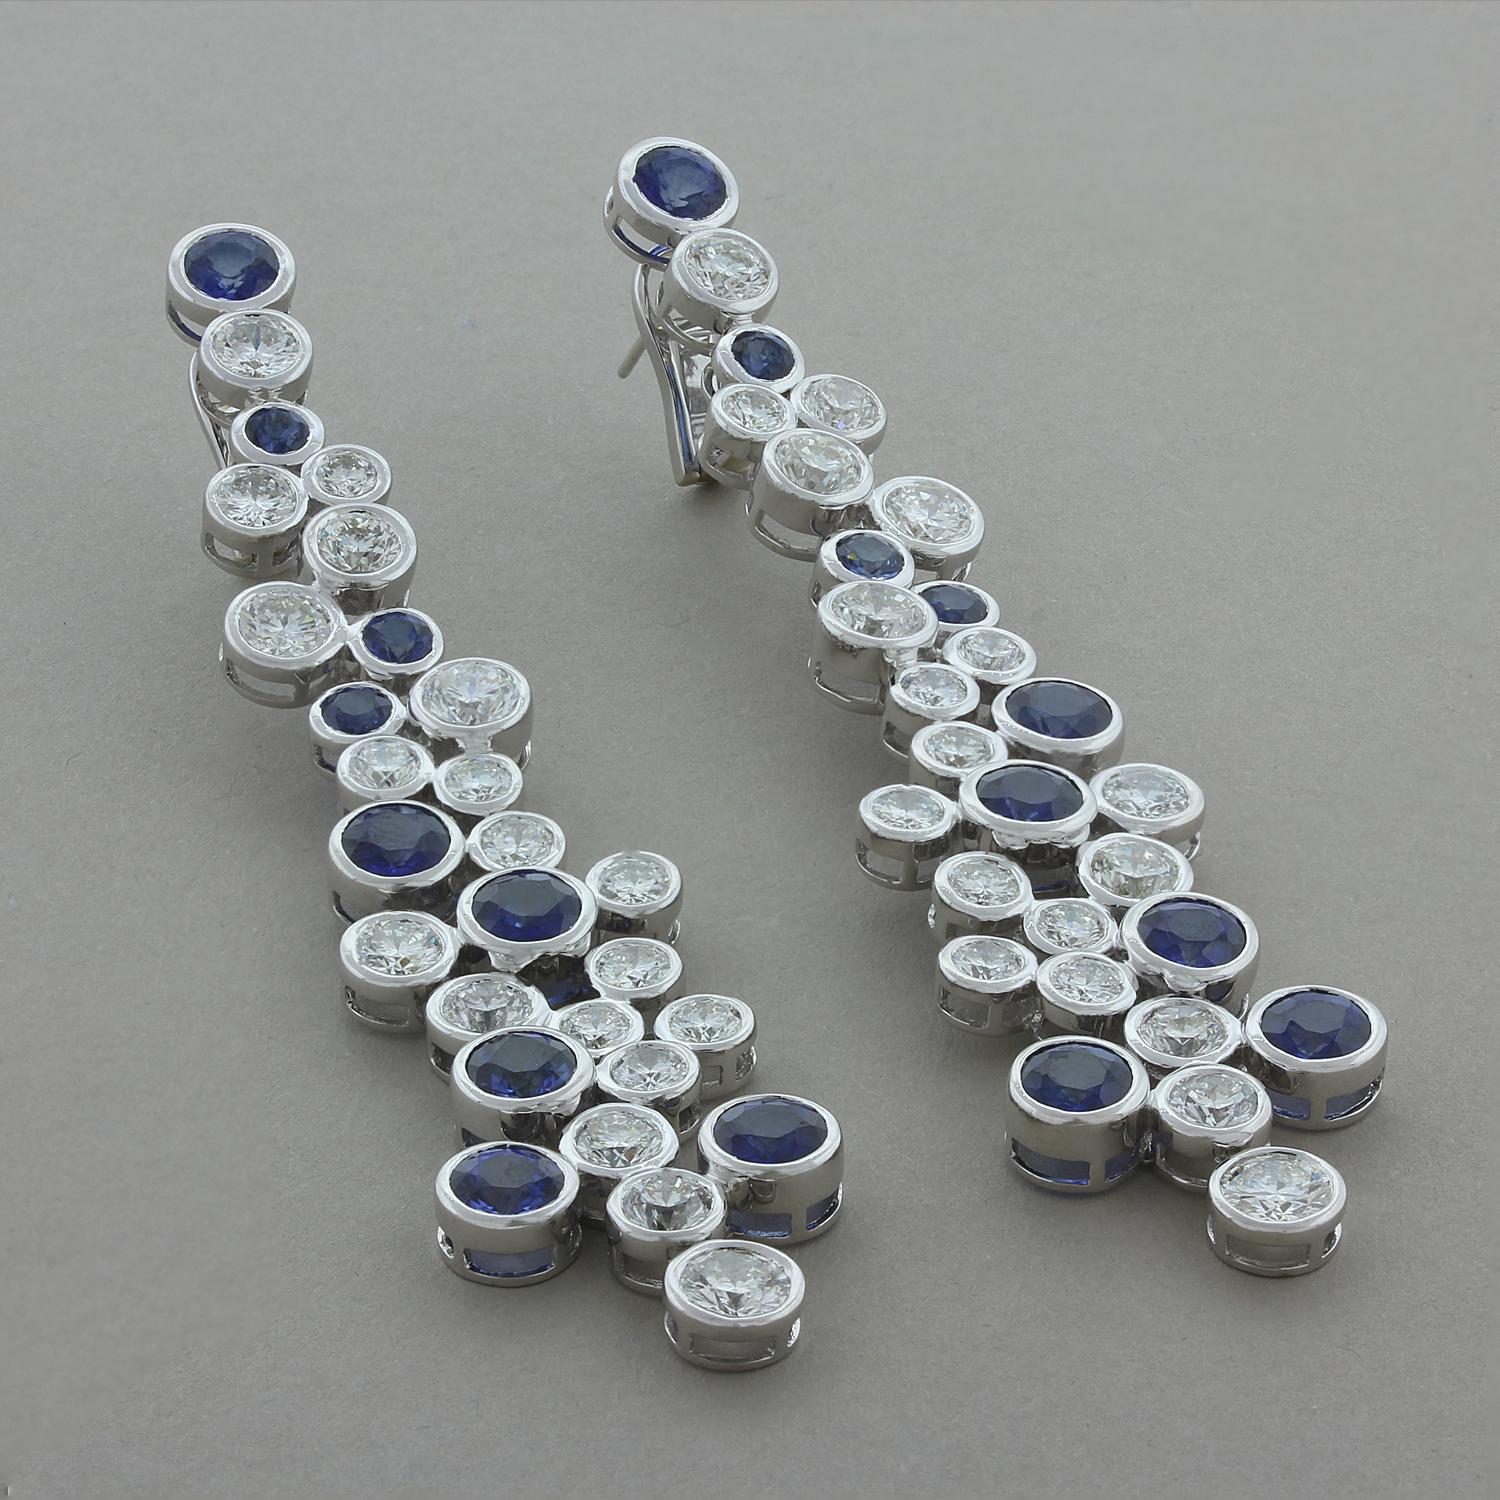 These contemporary long drop earrings feature 15.90 carats of round blue sapphires accompanied by 17.60 carats of sparkling colorless diamonds. The 18K white gold bezel setting gives this pair of flexible earrings a classic and clean look.


Earring